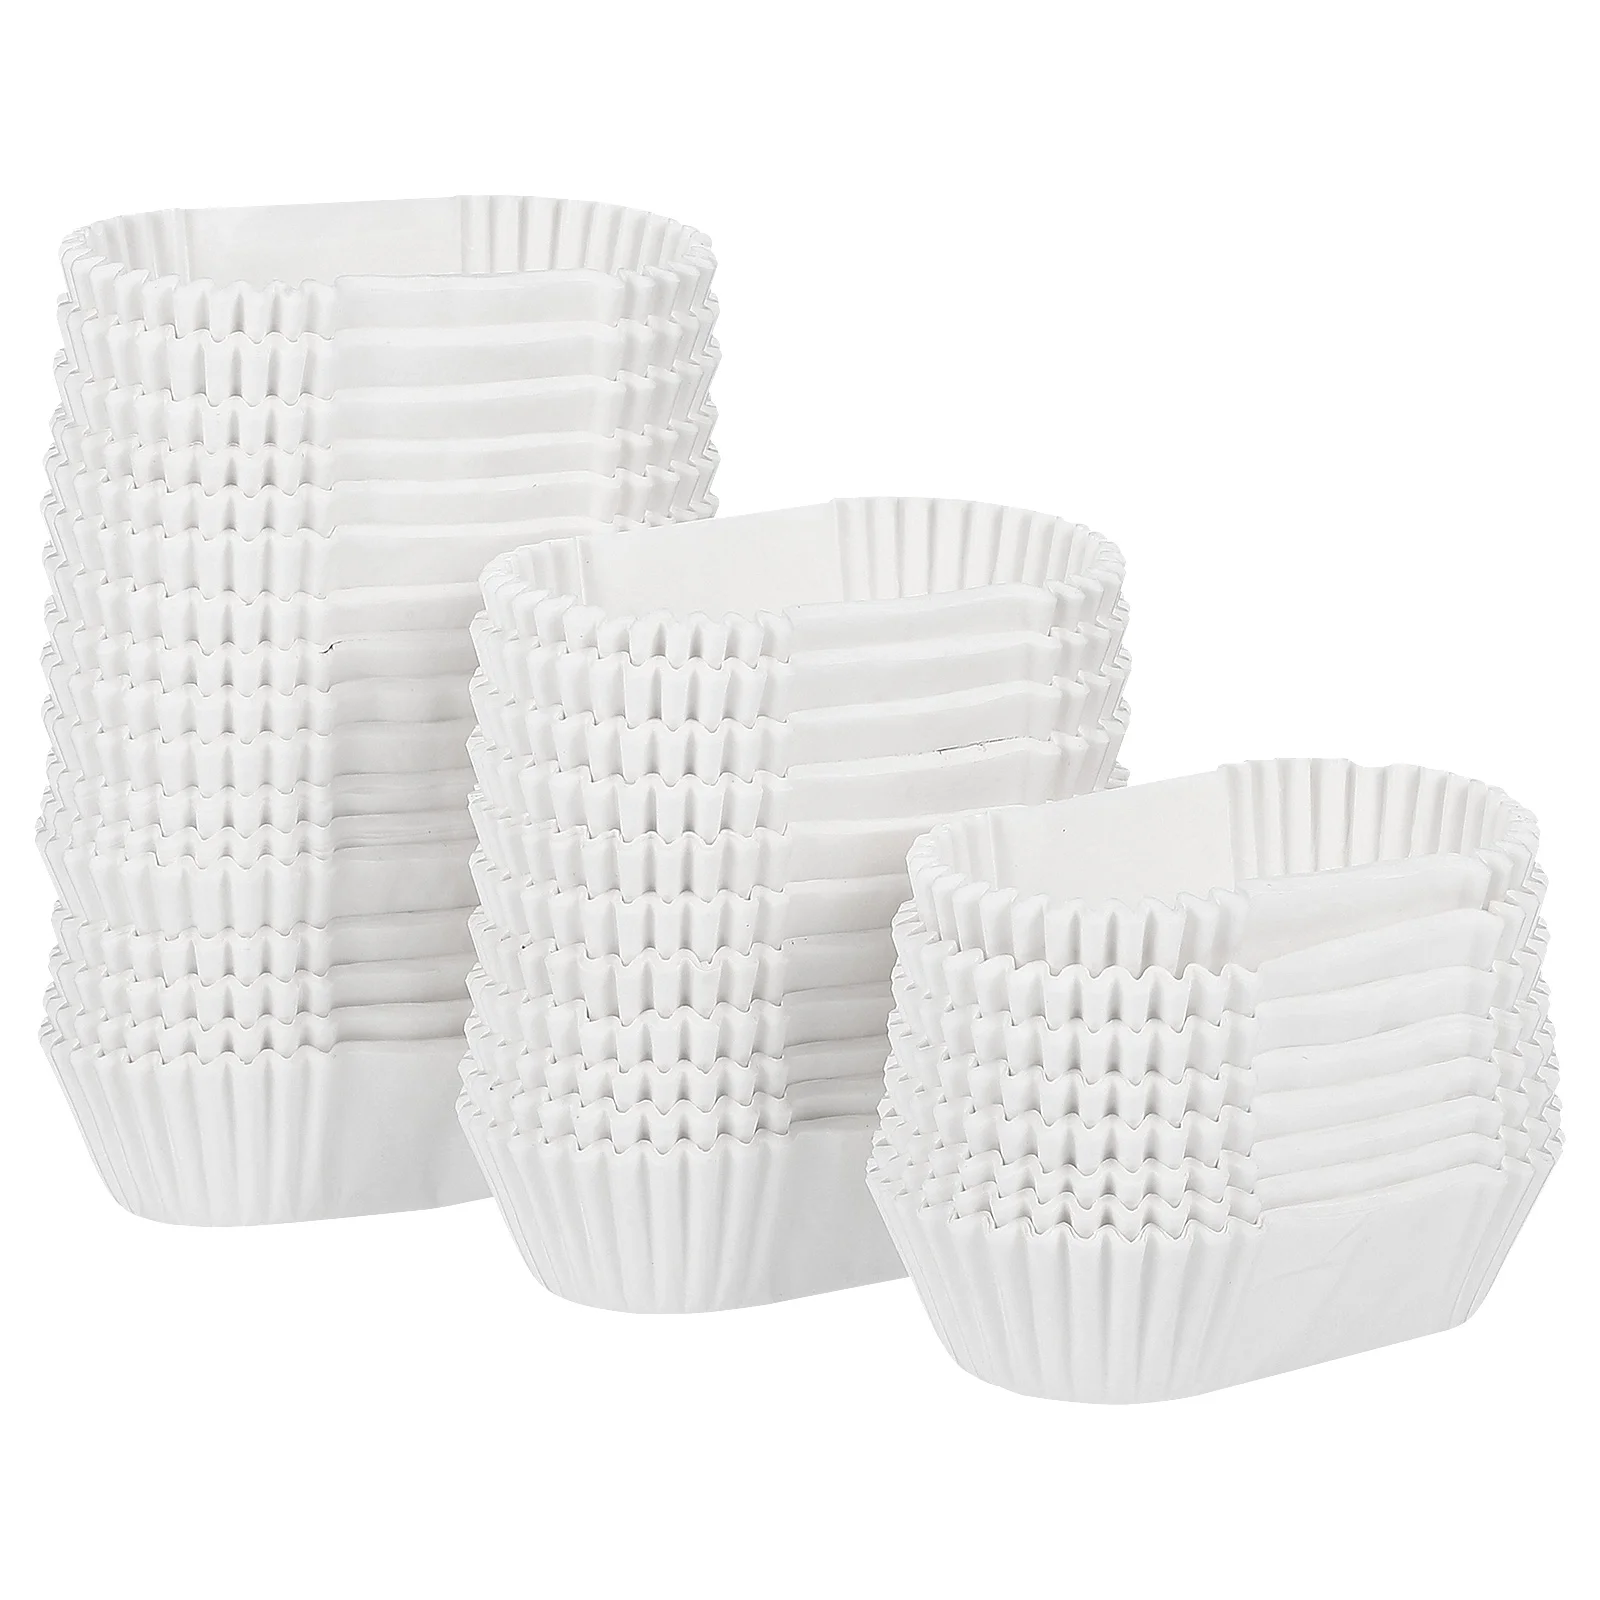 

1000 Pcs Disposable Dessert Bowls Paper Baking Cup Cups Wraps Bakeware Cake Case Grease Proof Cupcake Liners Oval